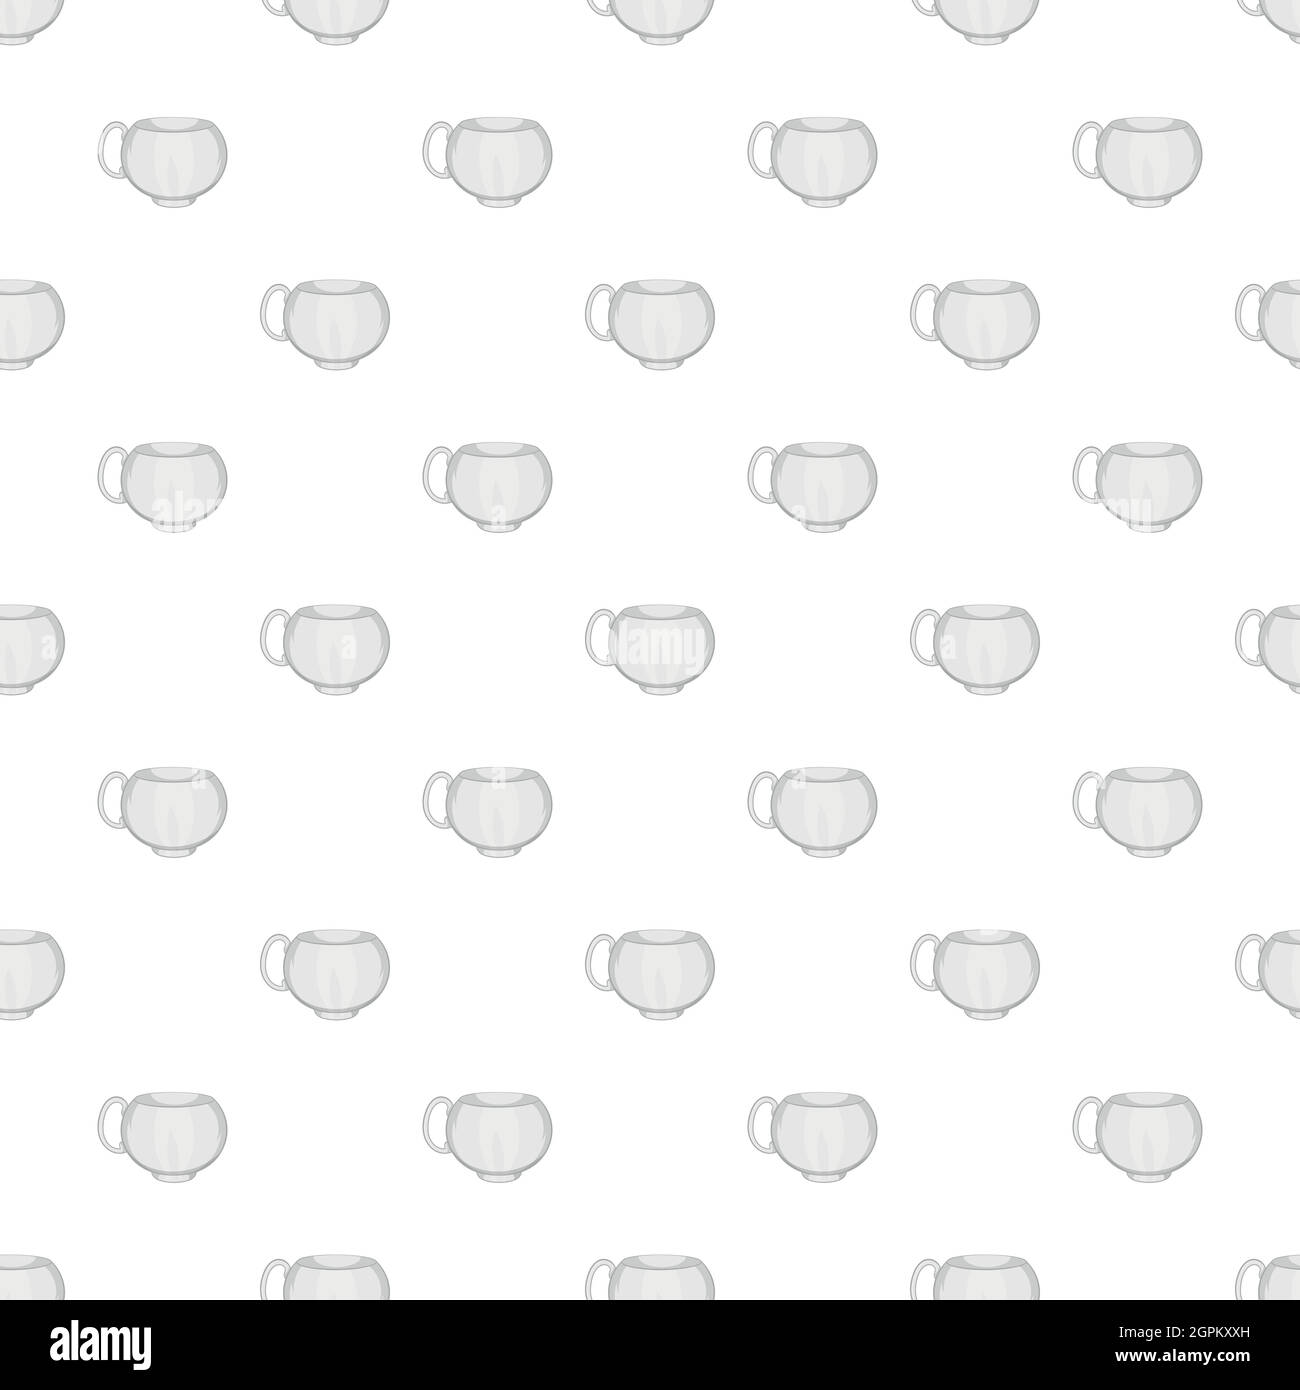 Cup pattern, cartoon style Stock Vector